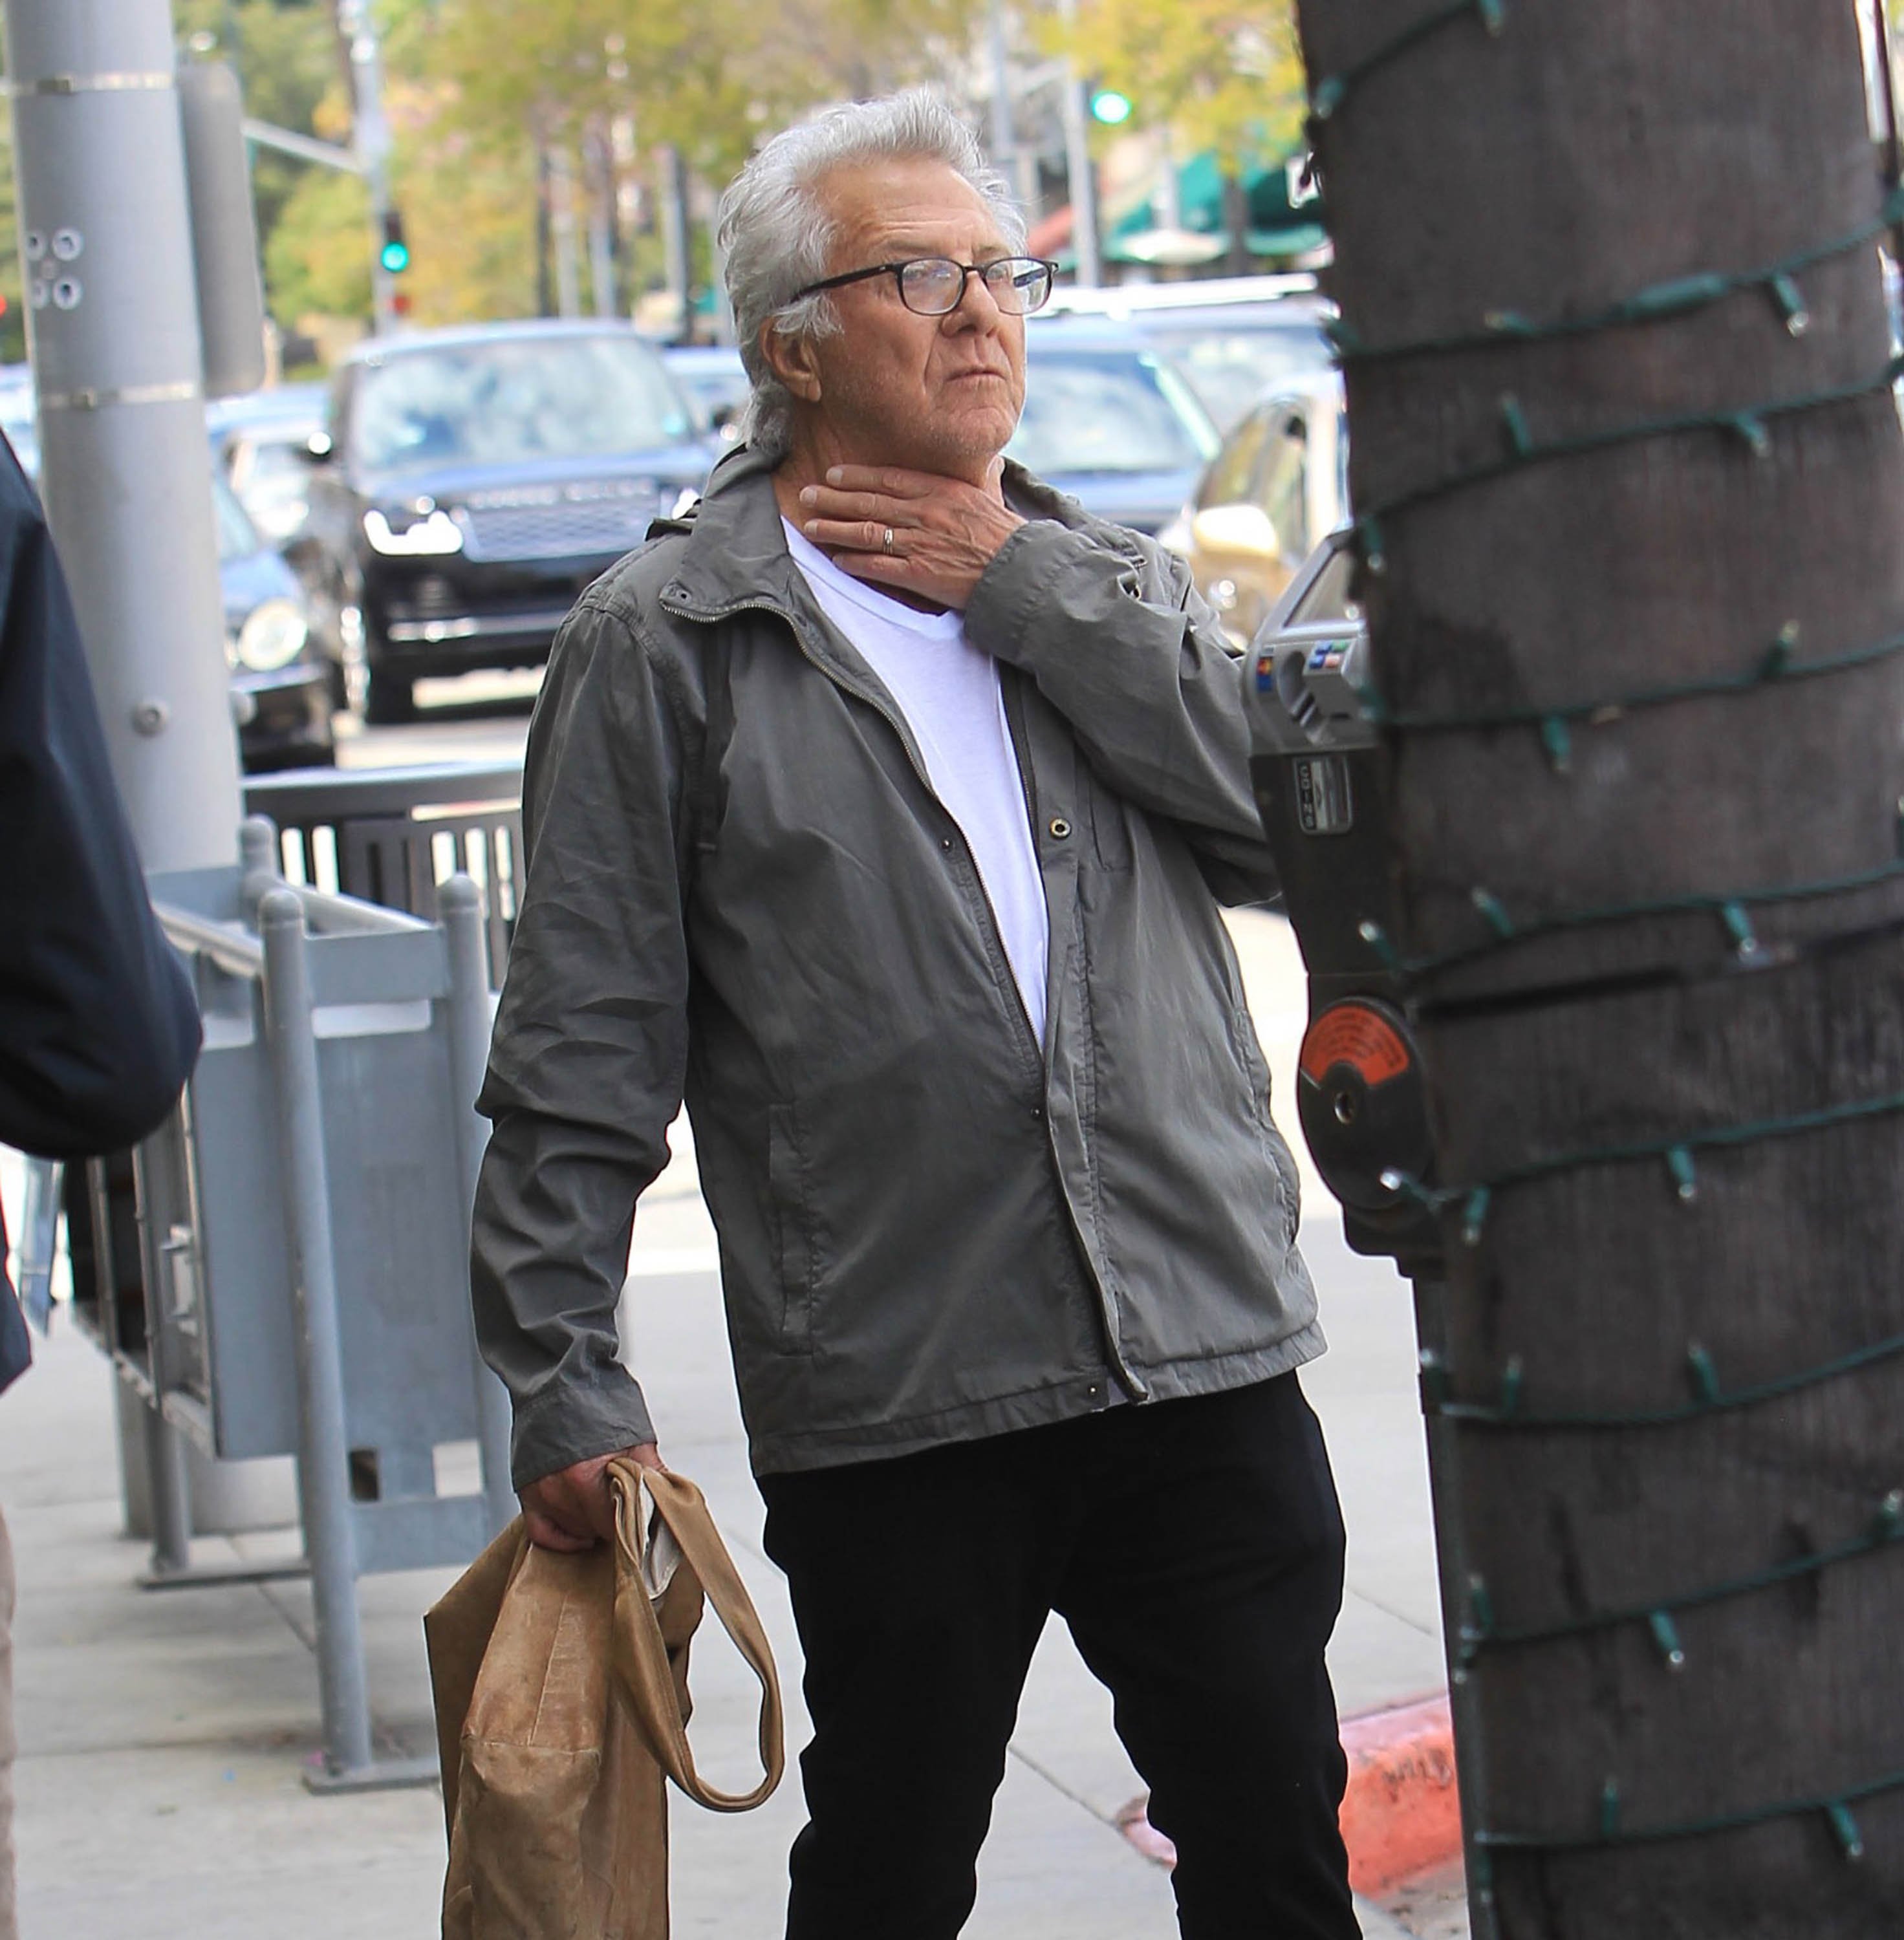 Dustin Hoffman is seen on April 30, 2019 in Los Angeles, California. | Source: Getty Images